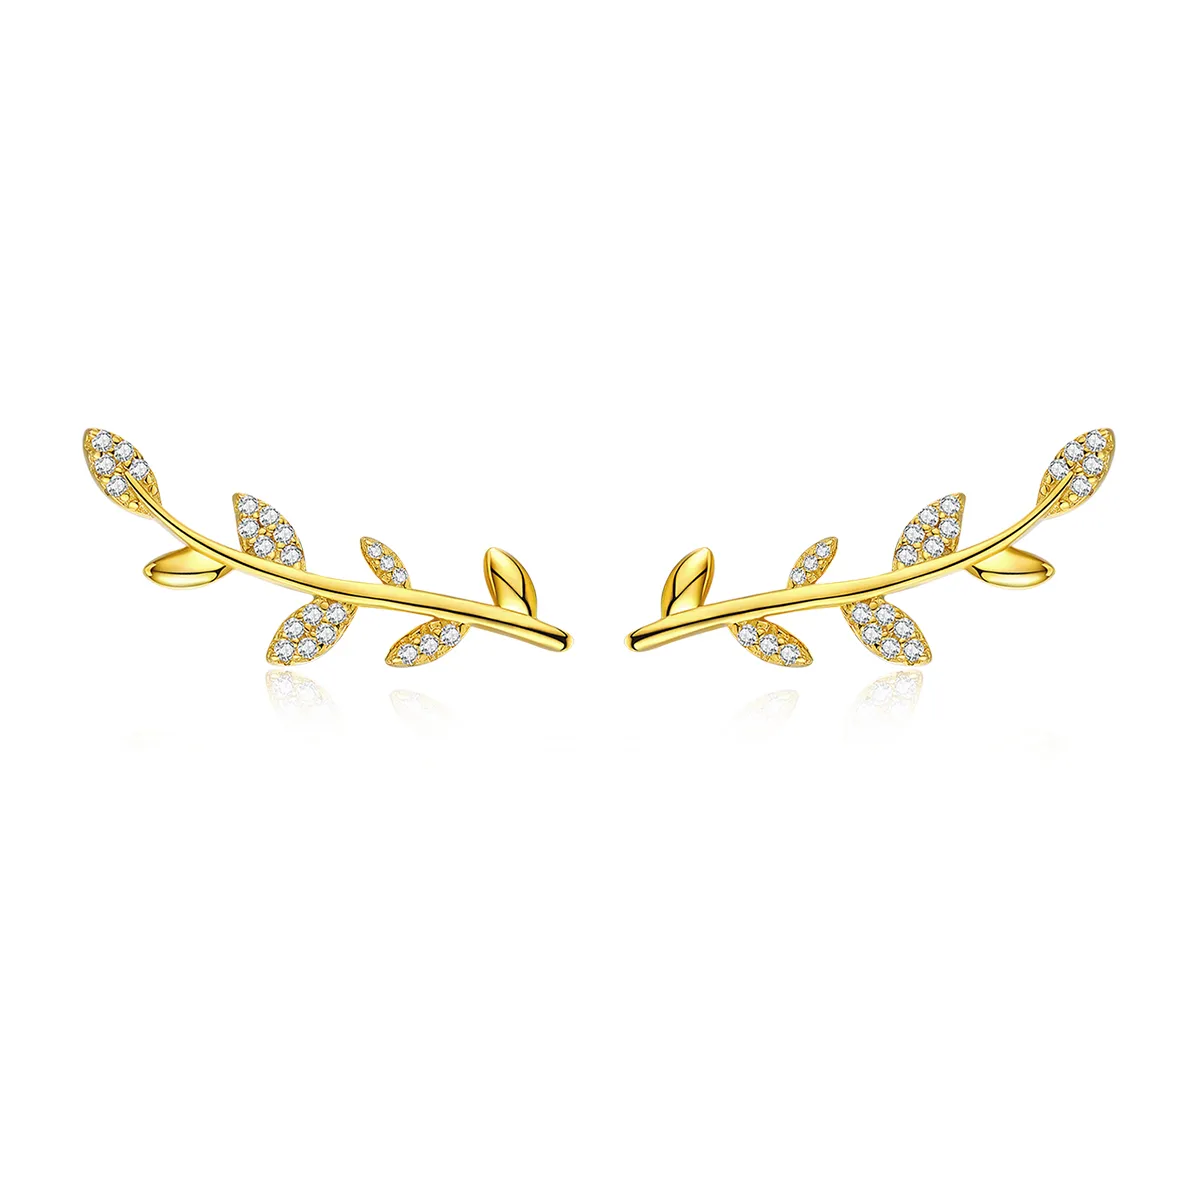 Pandora Style Gold-Plated Branch of Leaves Stud Earrings - SCE556